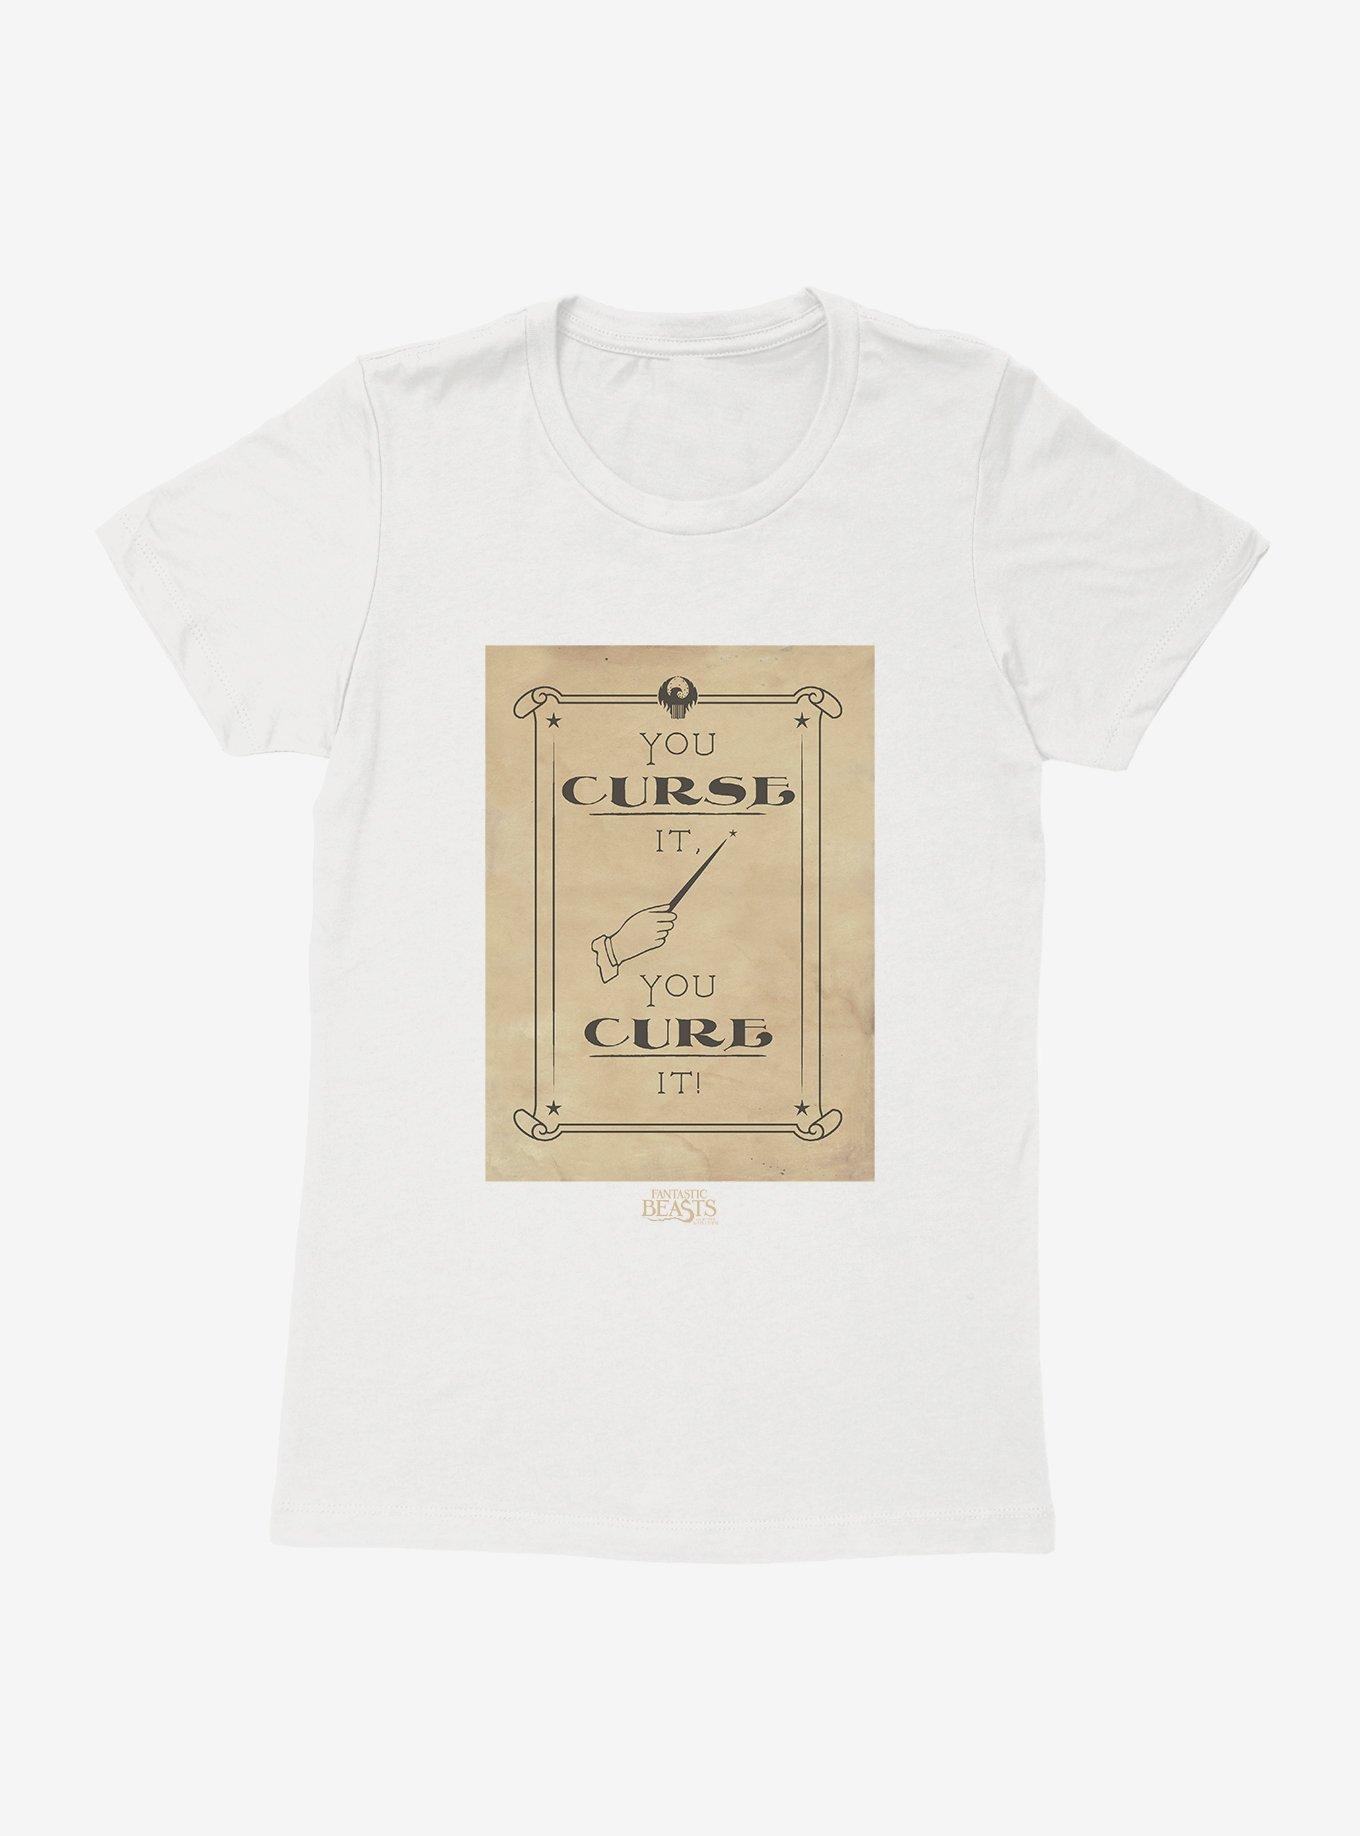 Fantastic Beasts You Curse It, You Cure It! Womens T-Shirt, WHITE, hi-res